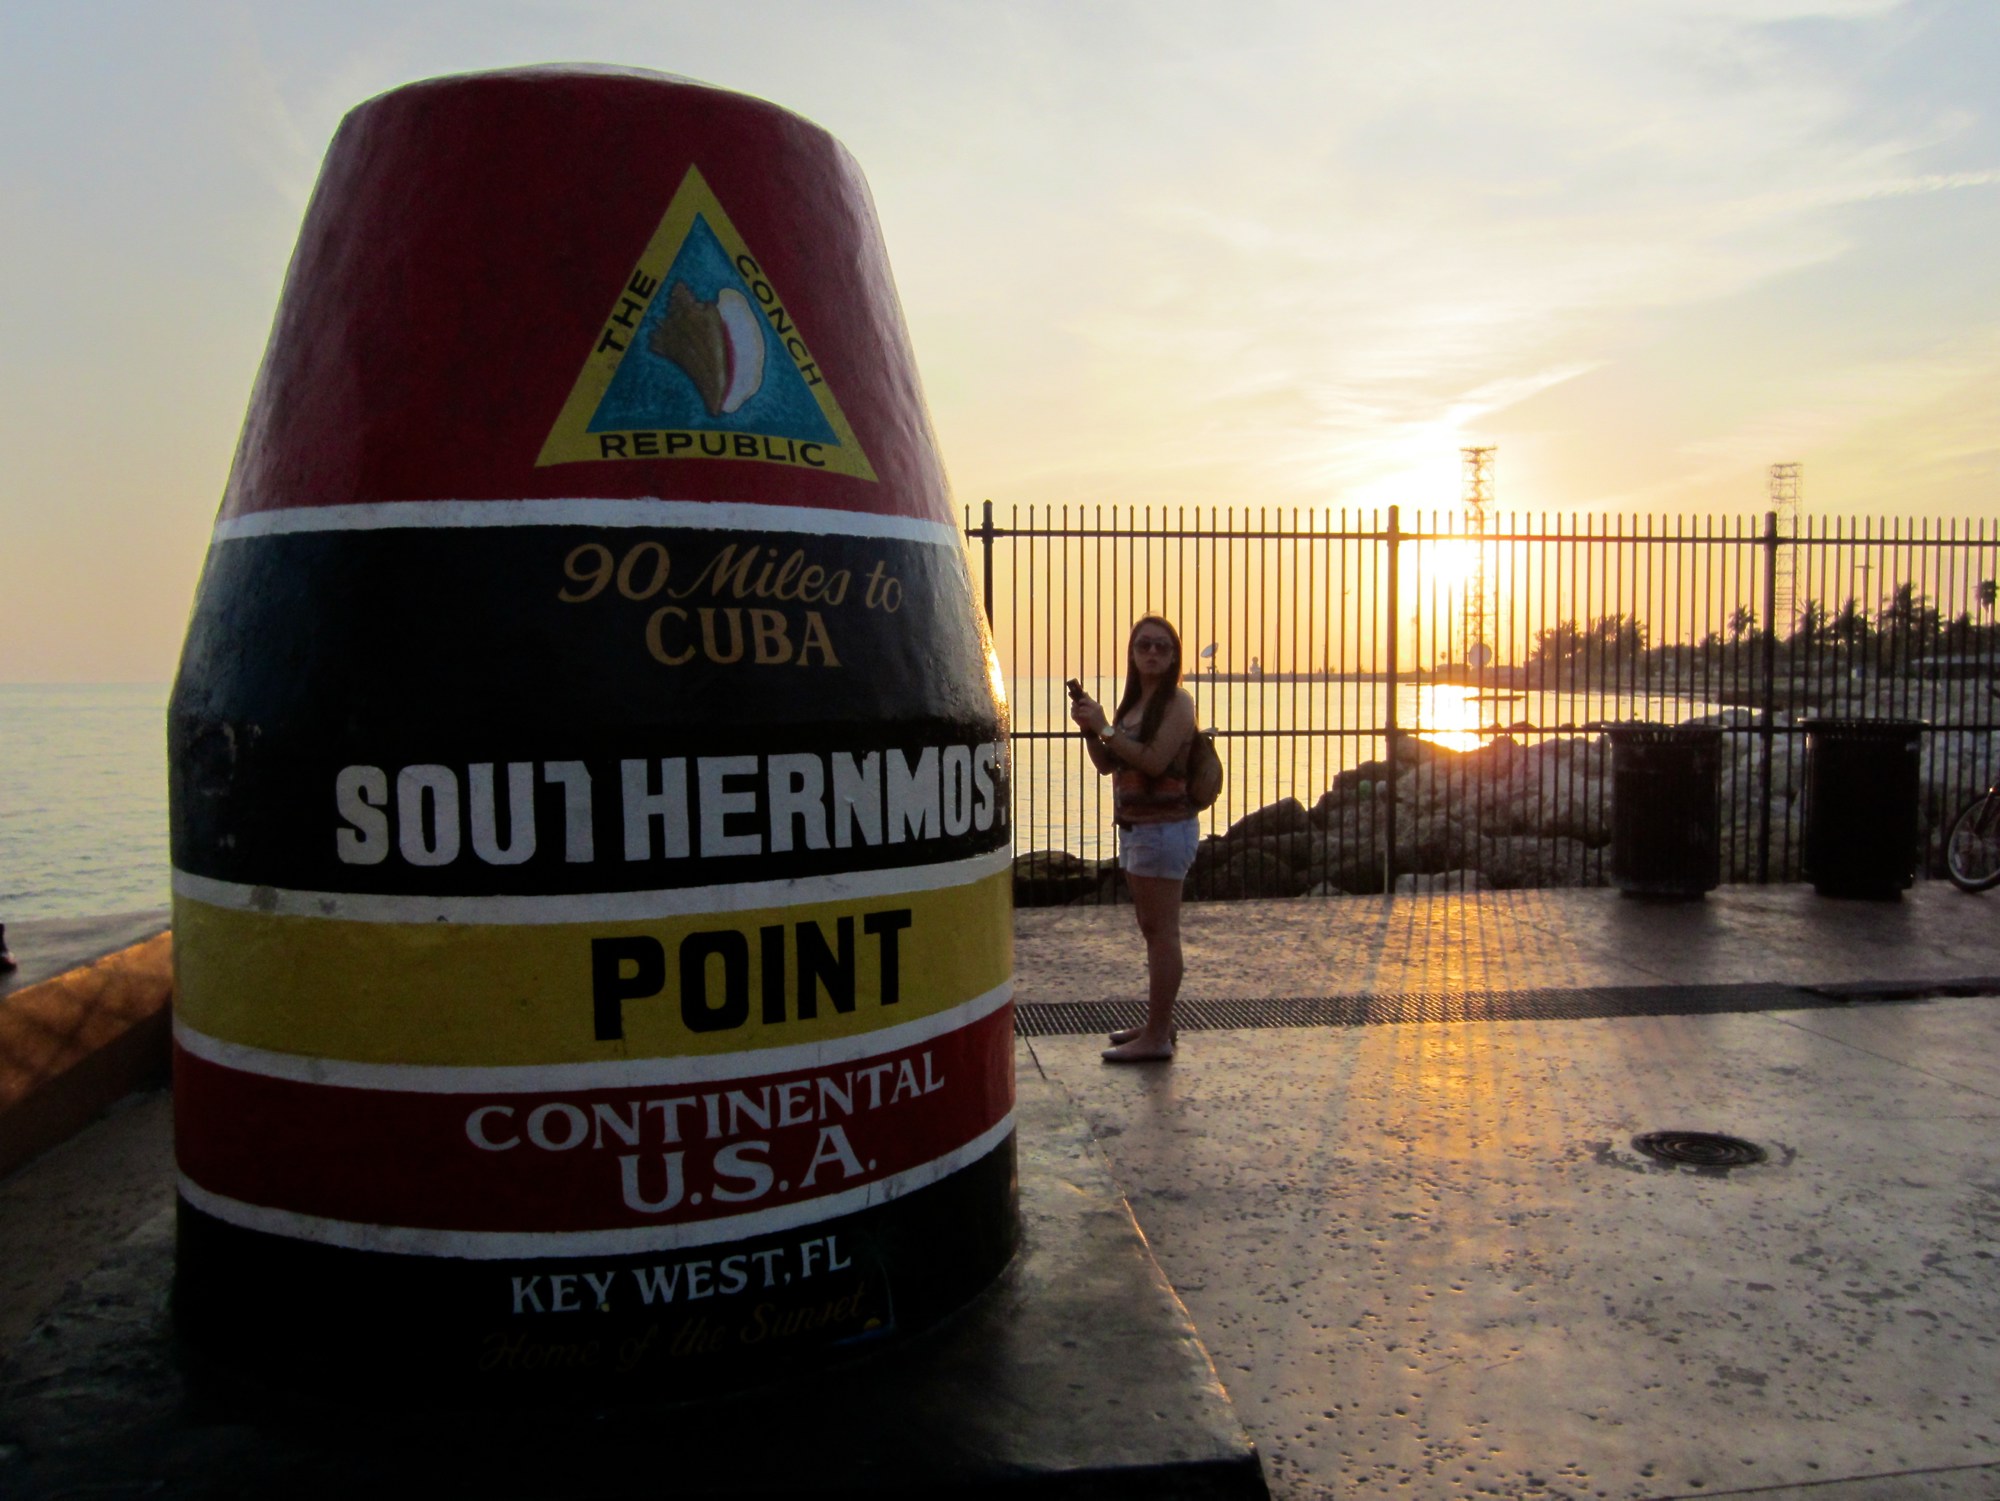 Road Trip USA: Monument at southernmost point in the USA